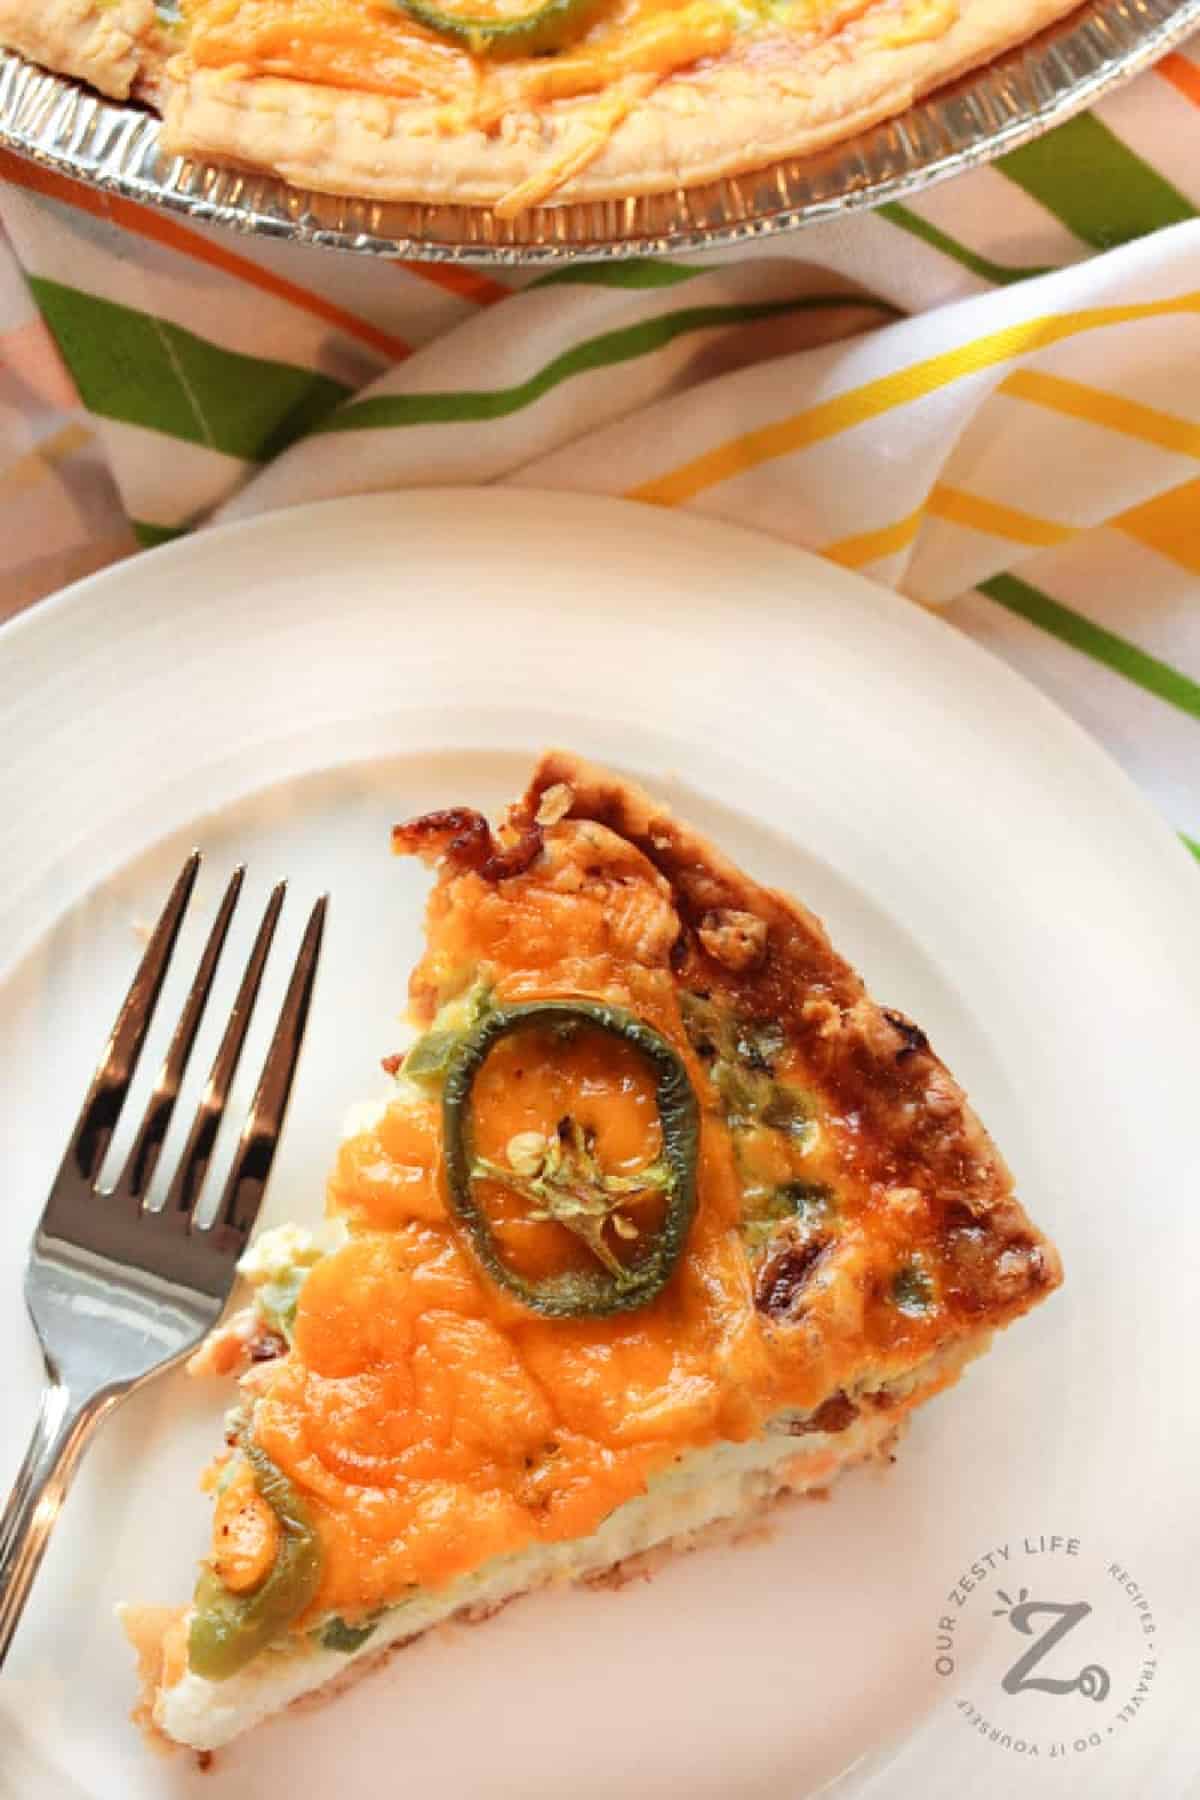 zesty bacon and cheese quiche on a white plate with a fork and quiche in a pie plate on the side